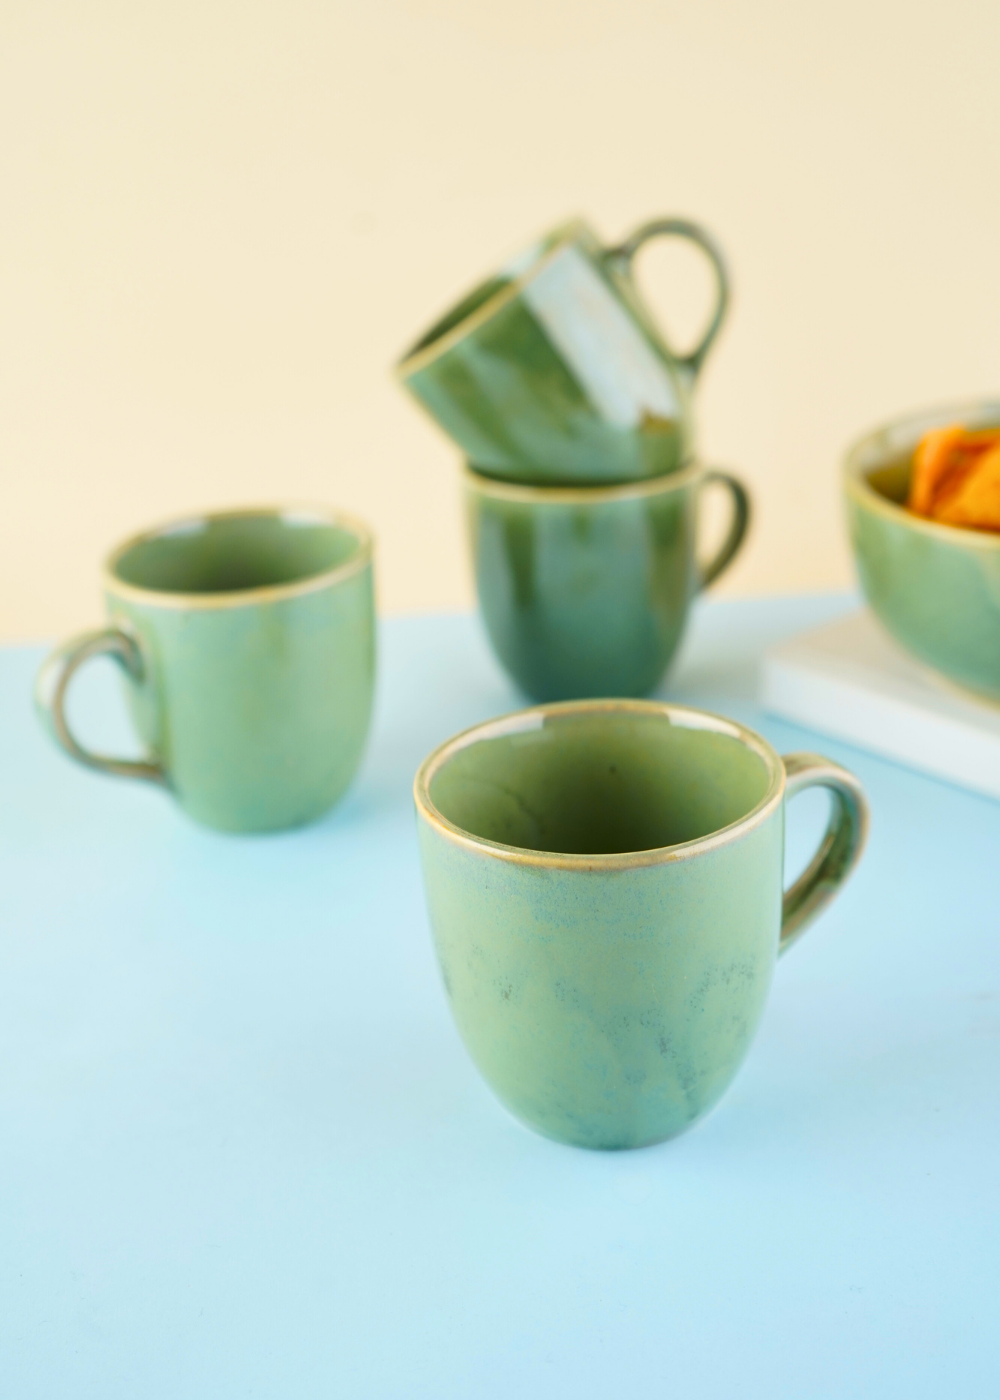 basil green chai cup for your daily routine tea or coffee